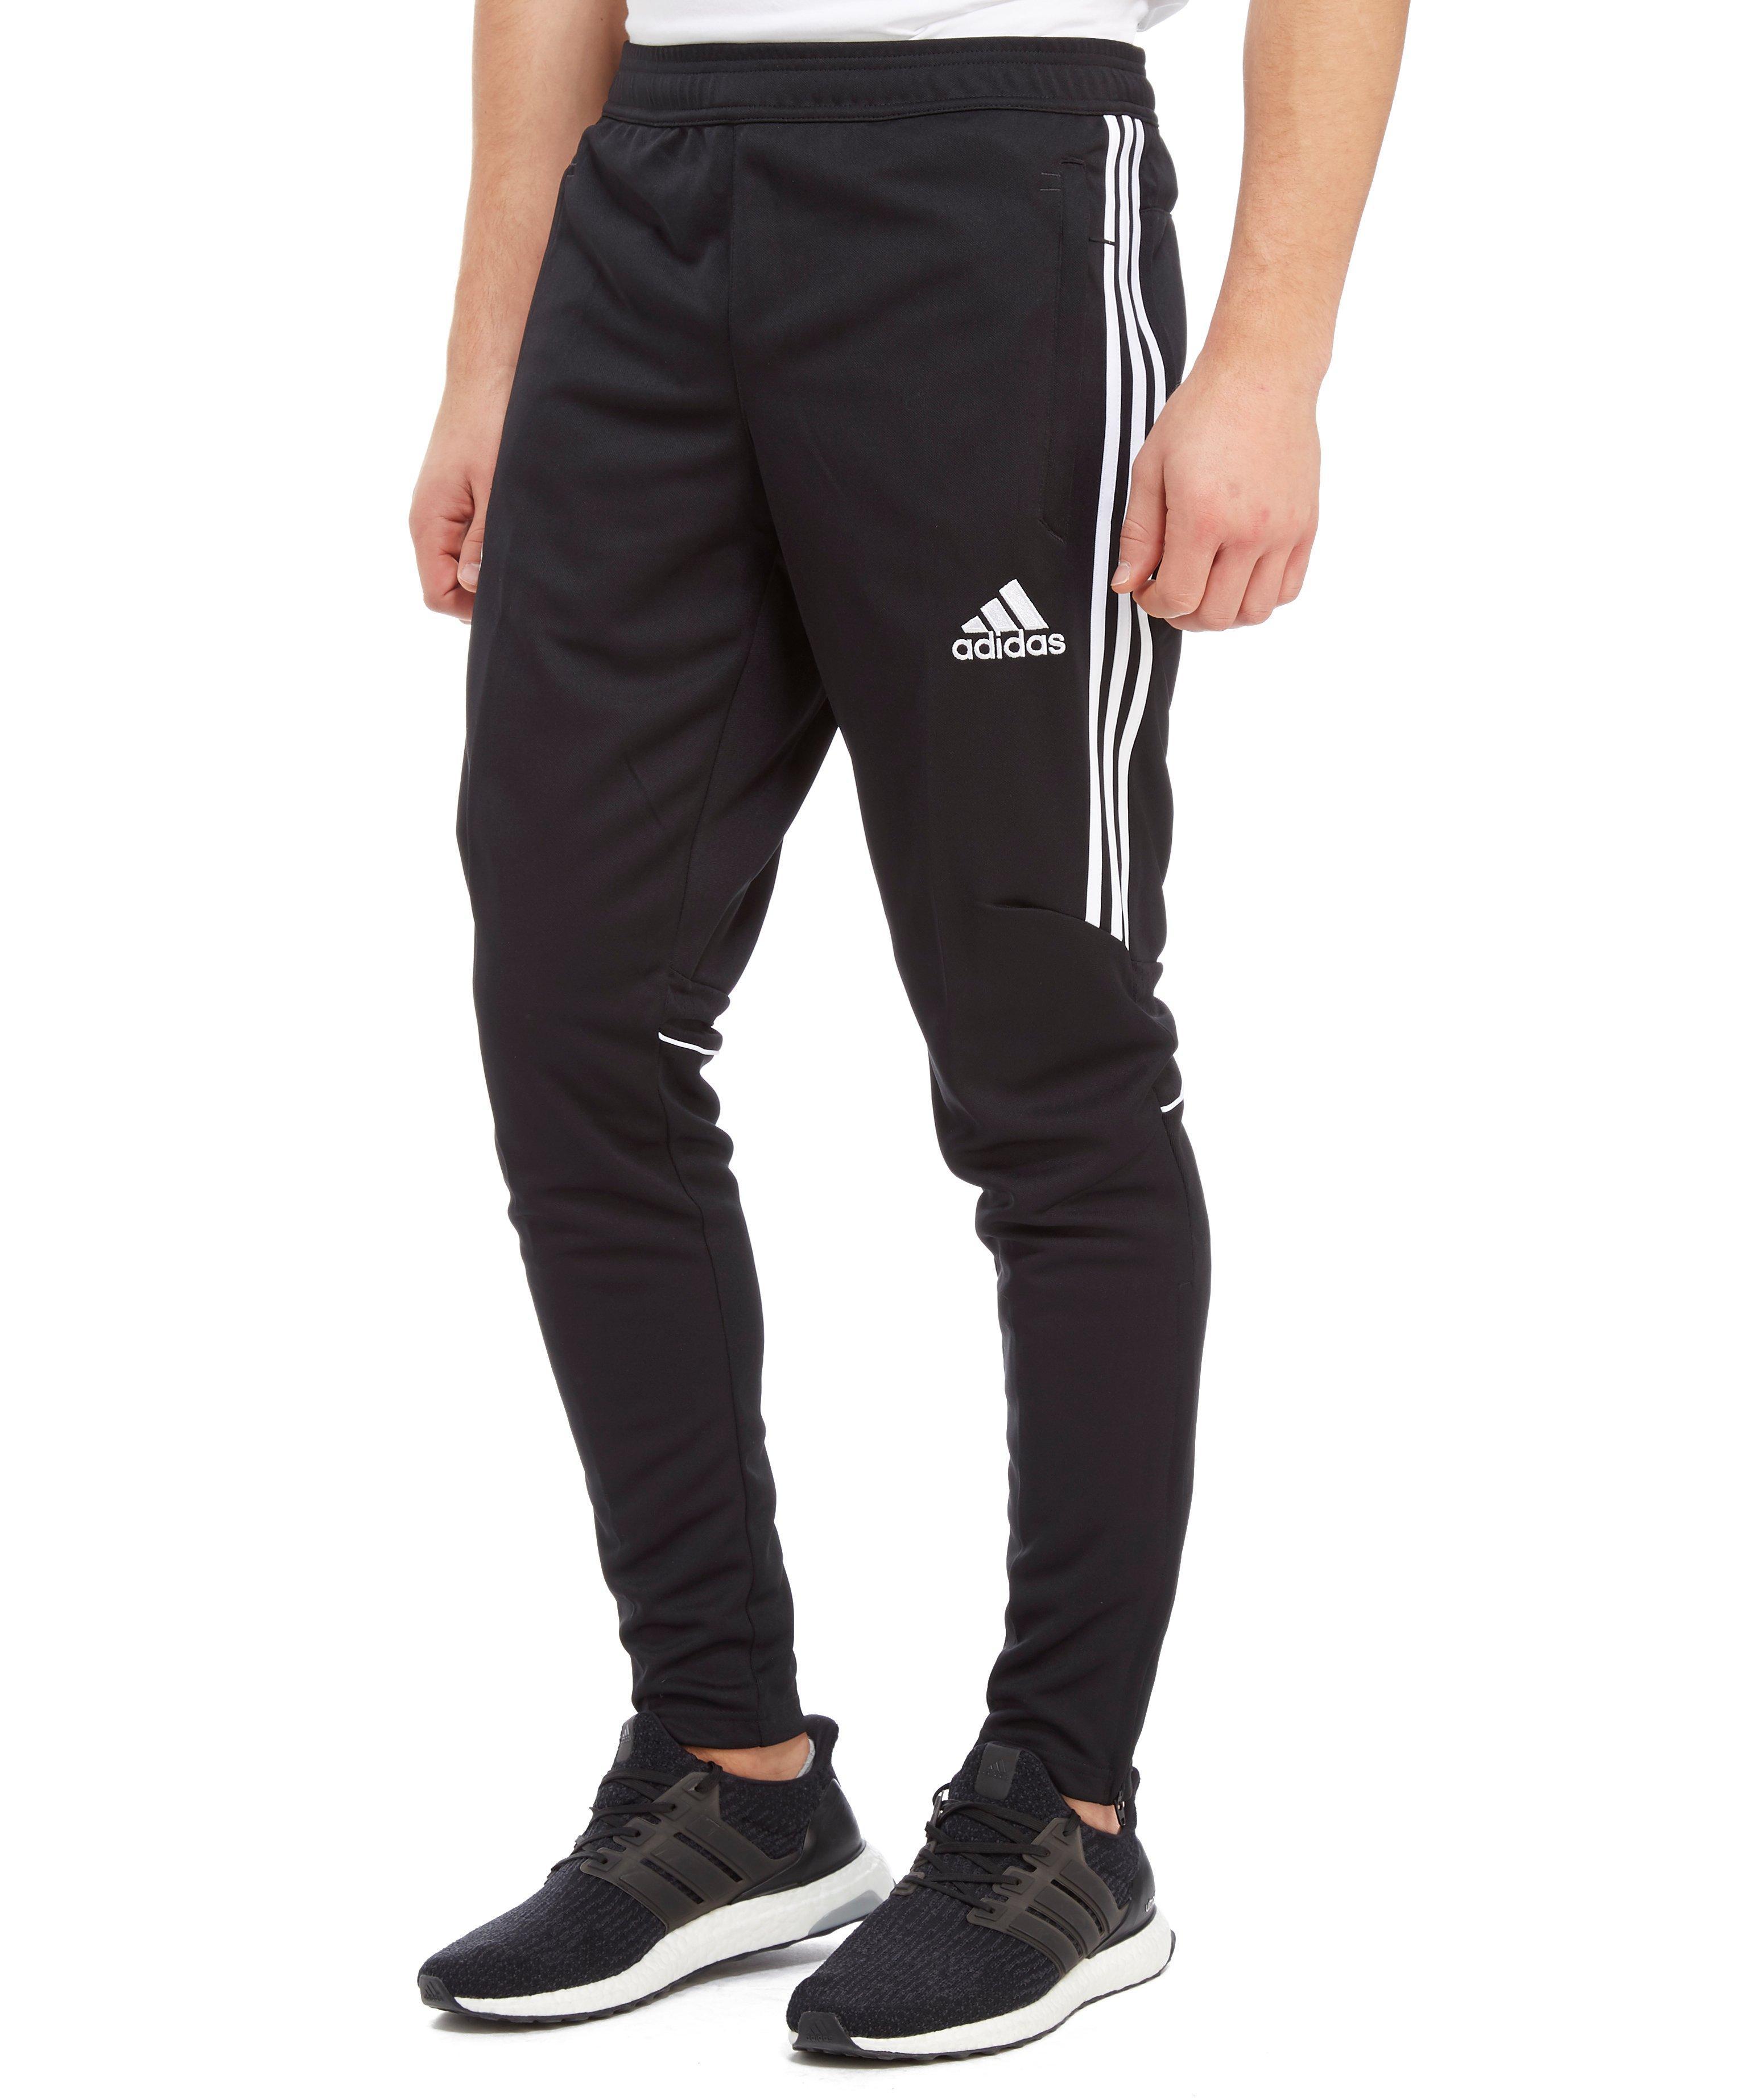 adidas Synthetic Tango Pants in Black/White (Black) for Men - Lyst